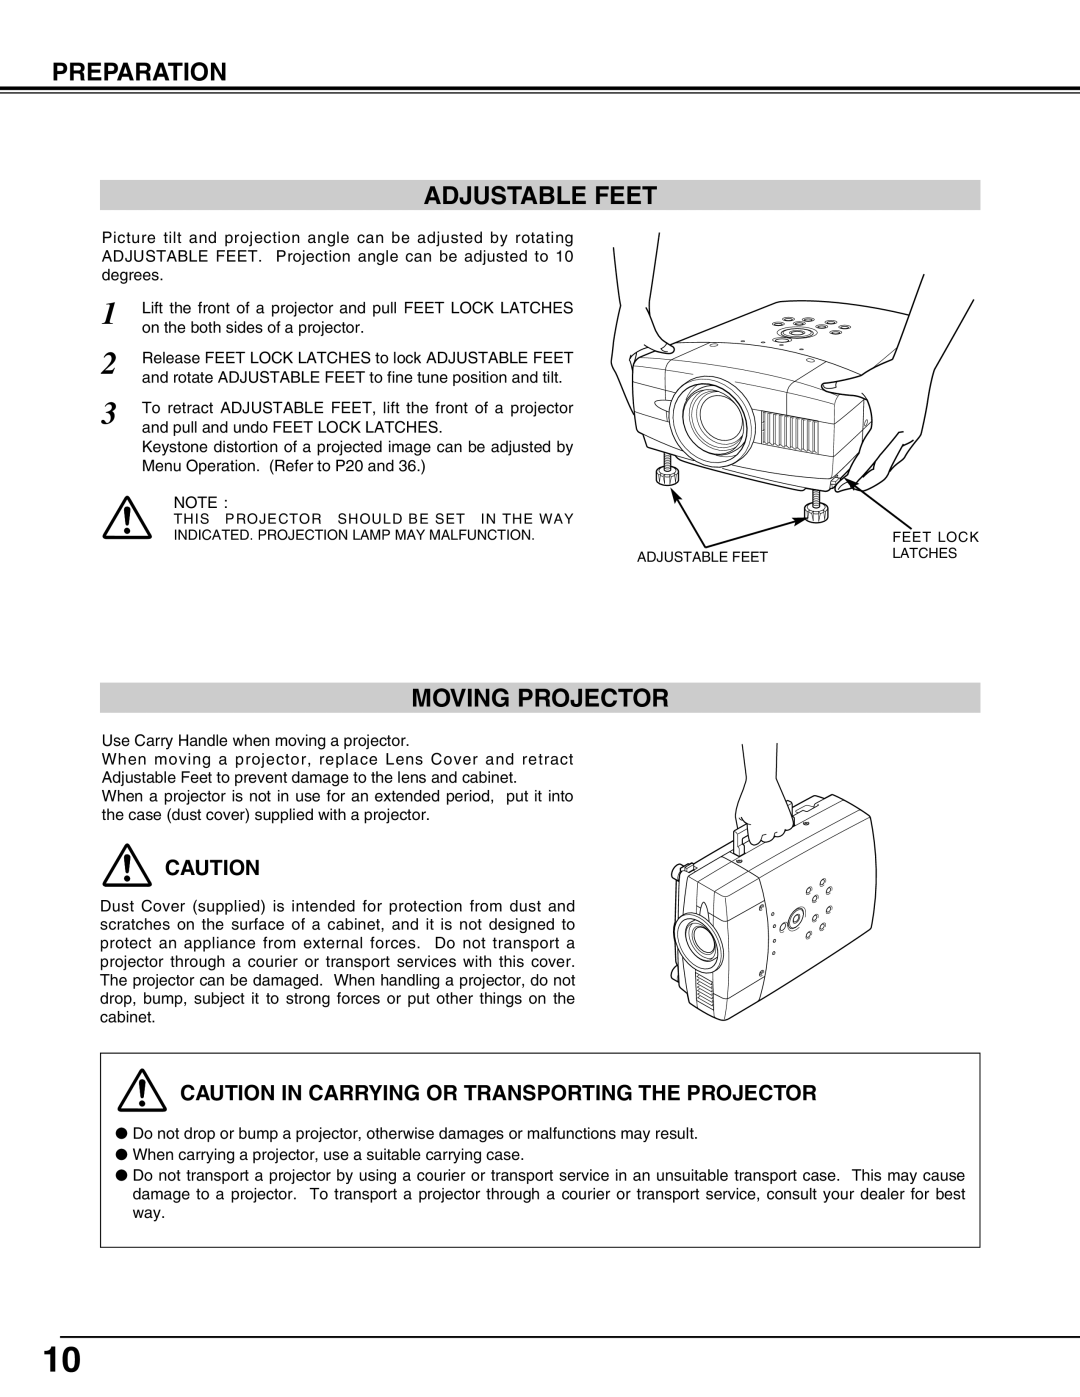 Sanyo PLC-XT10A Preparation Adjustable Feet, Moving Projector, Caution In Carrying Or Transporting The Projector 